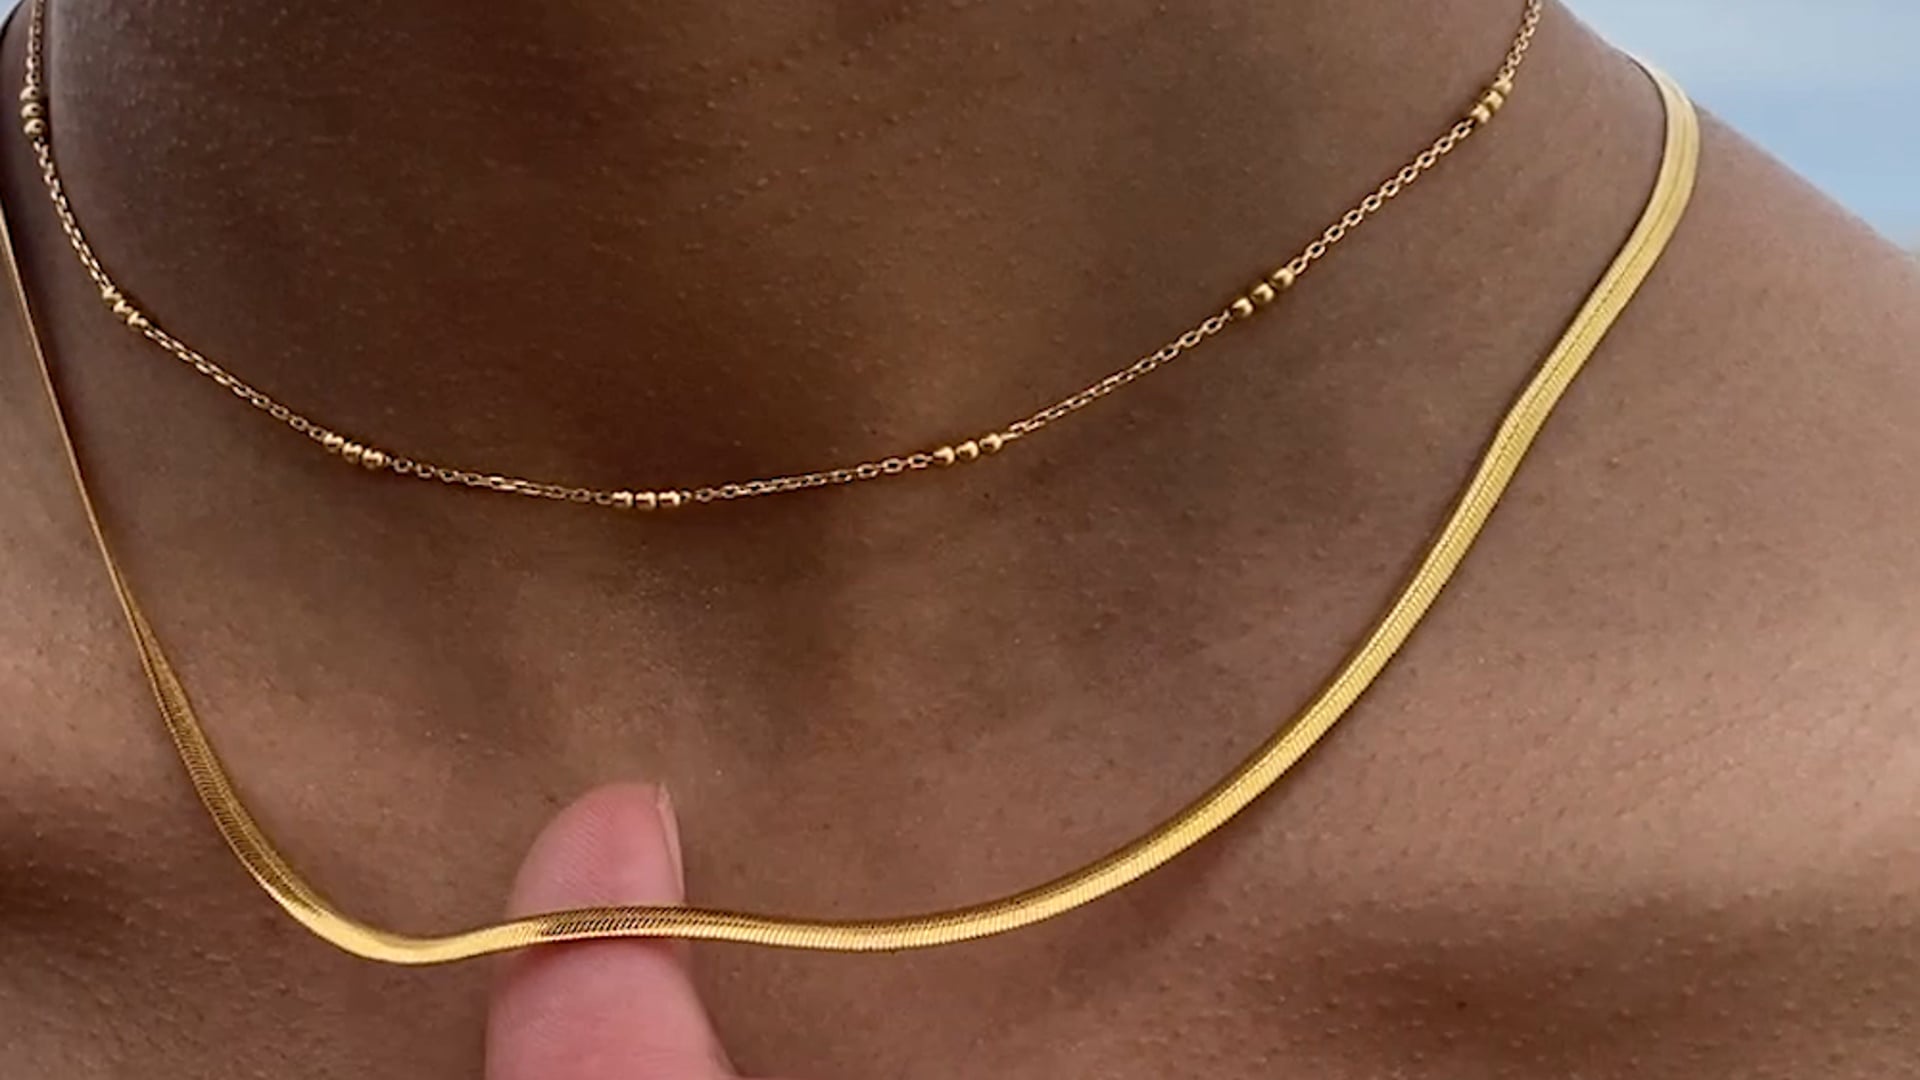 Snake Chain Necklace 46cm/18' in 18k Gold Vermeil on Sterling Silver